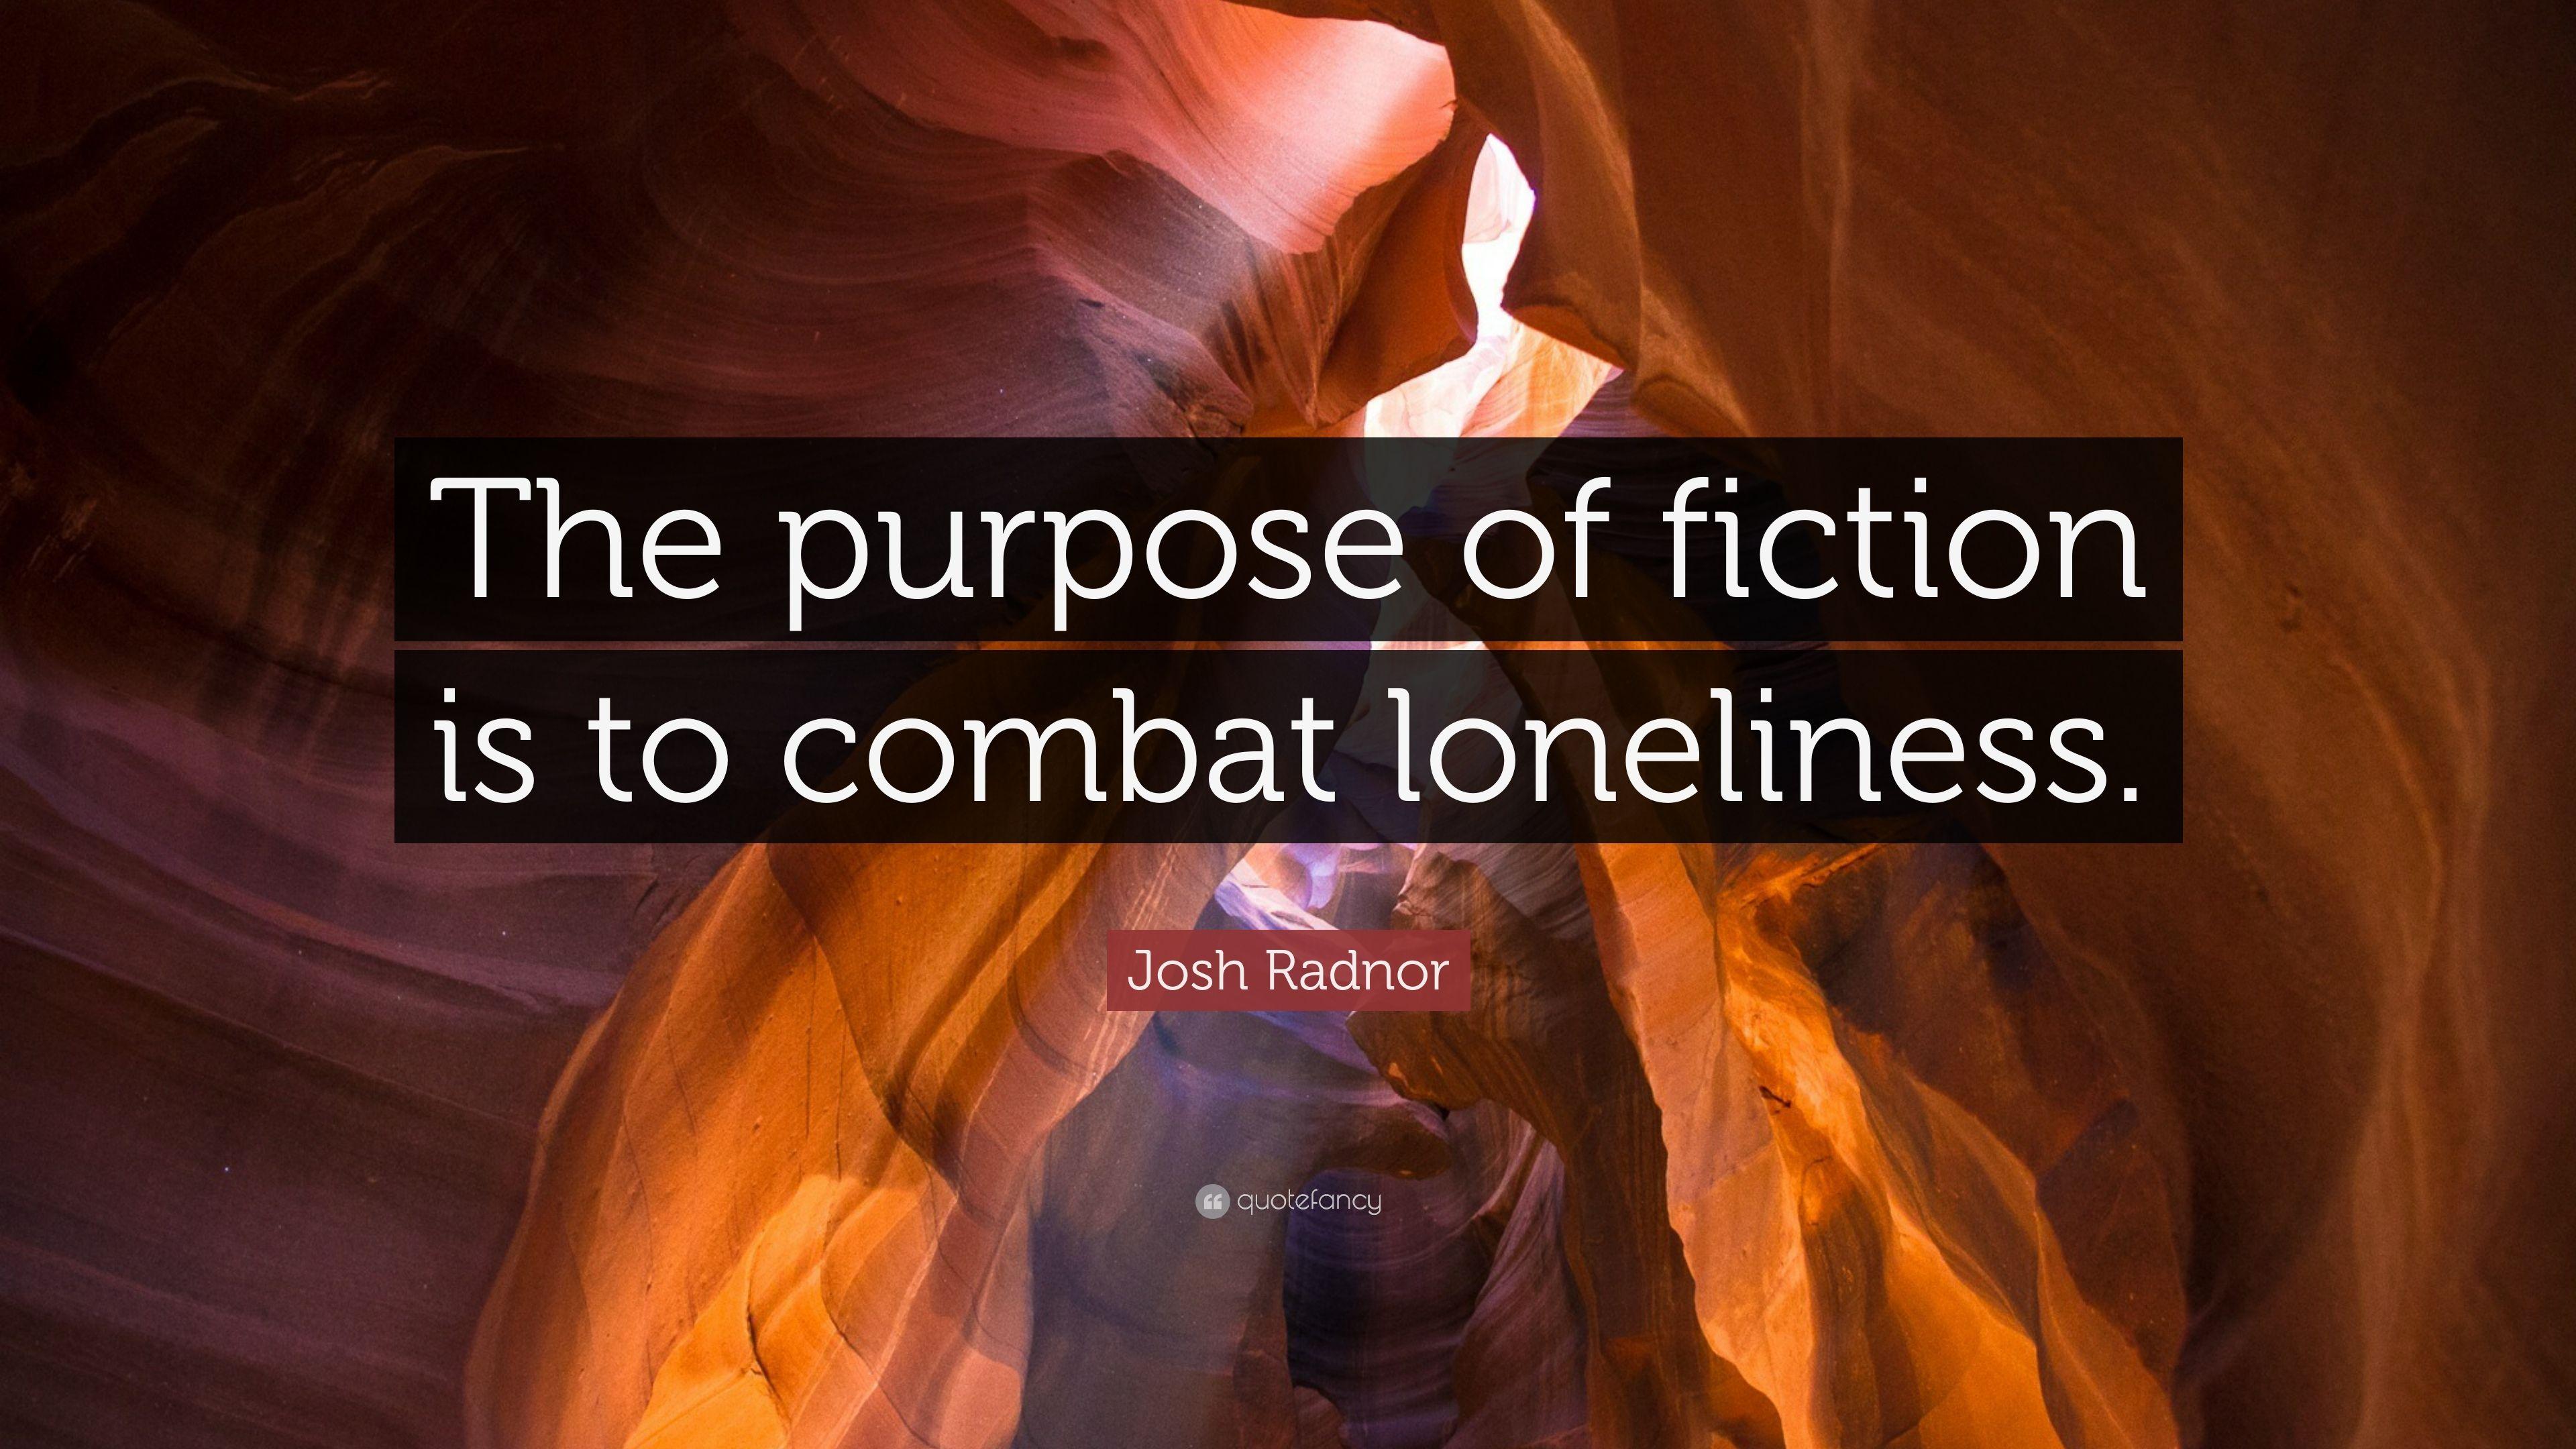 Josh Radnor Quote: “The purpose of fiction is to combat loneliness